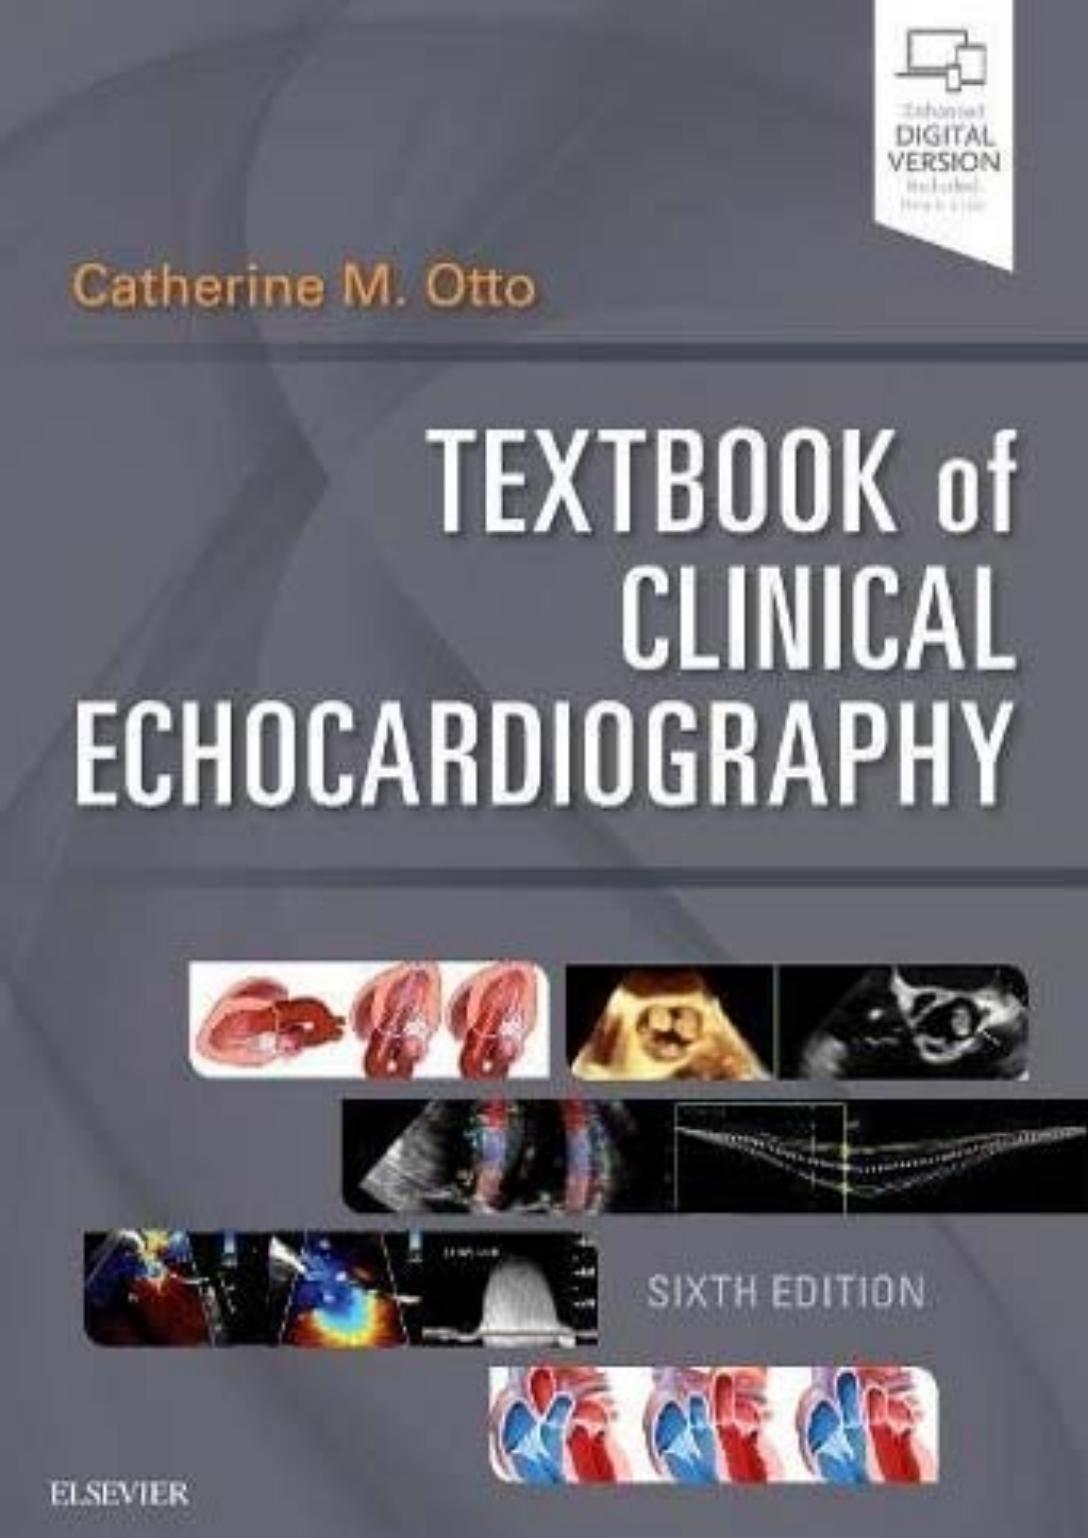 Catherine M. Otto MD  Textbook of Clinical Echocardiography 6th ed. (2018) by Unknown